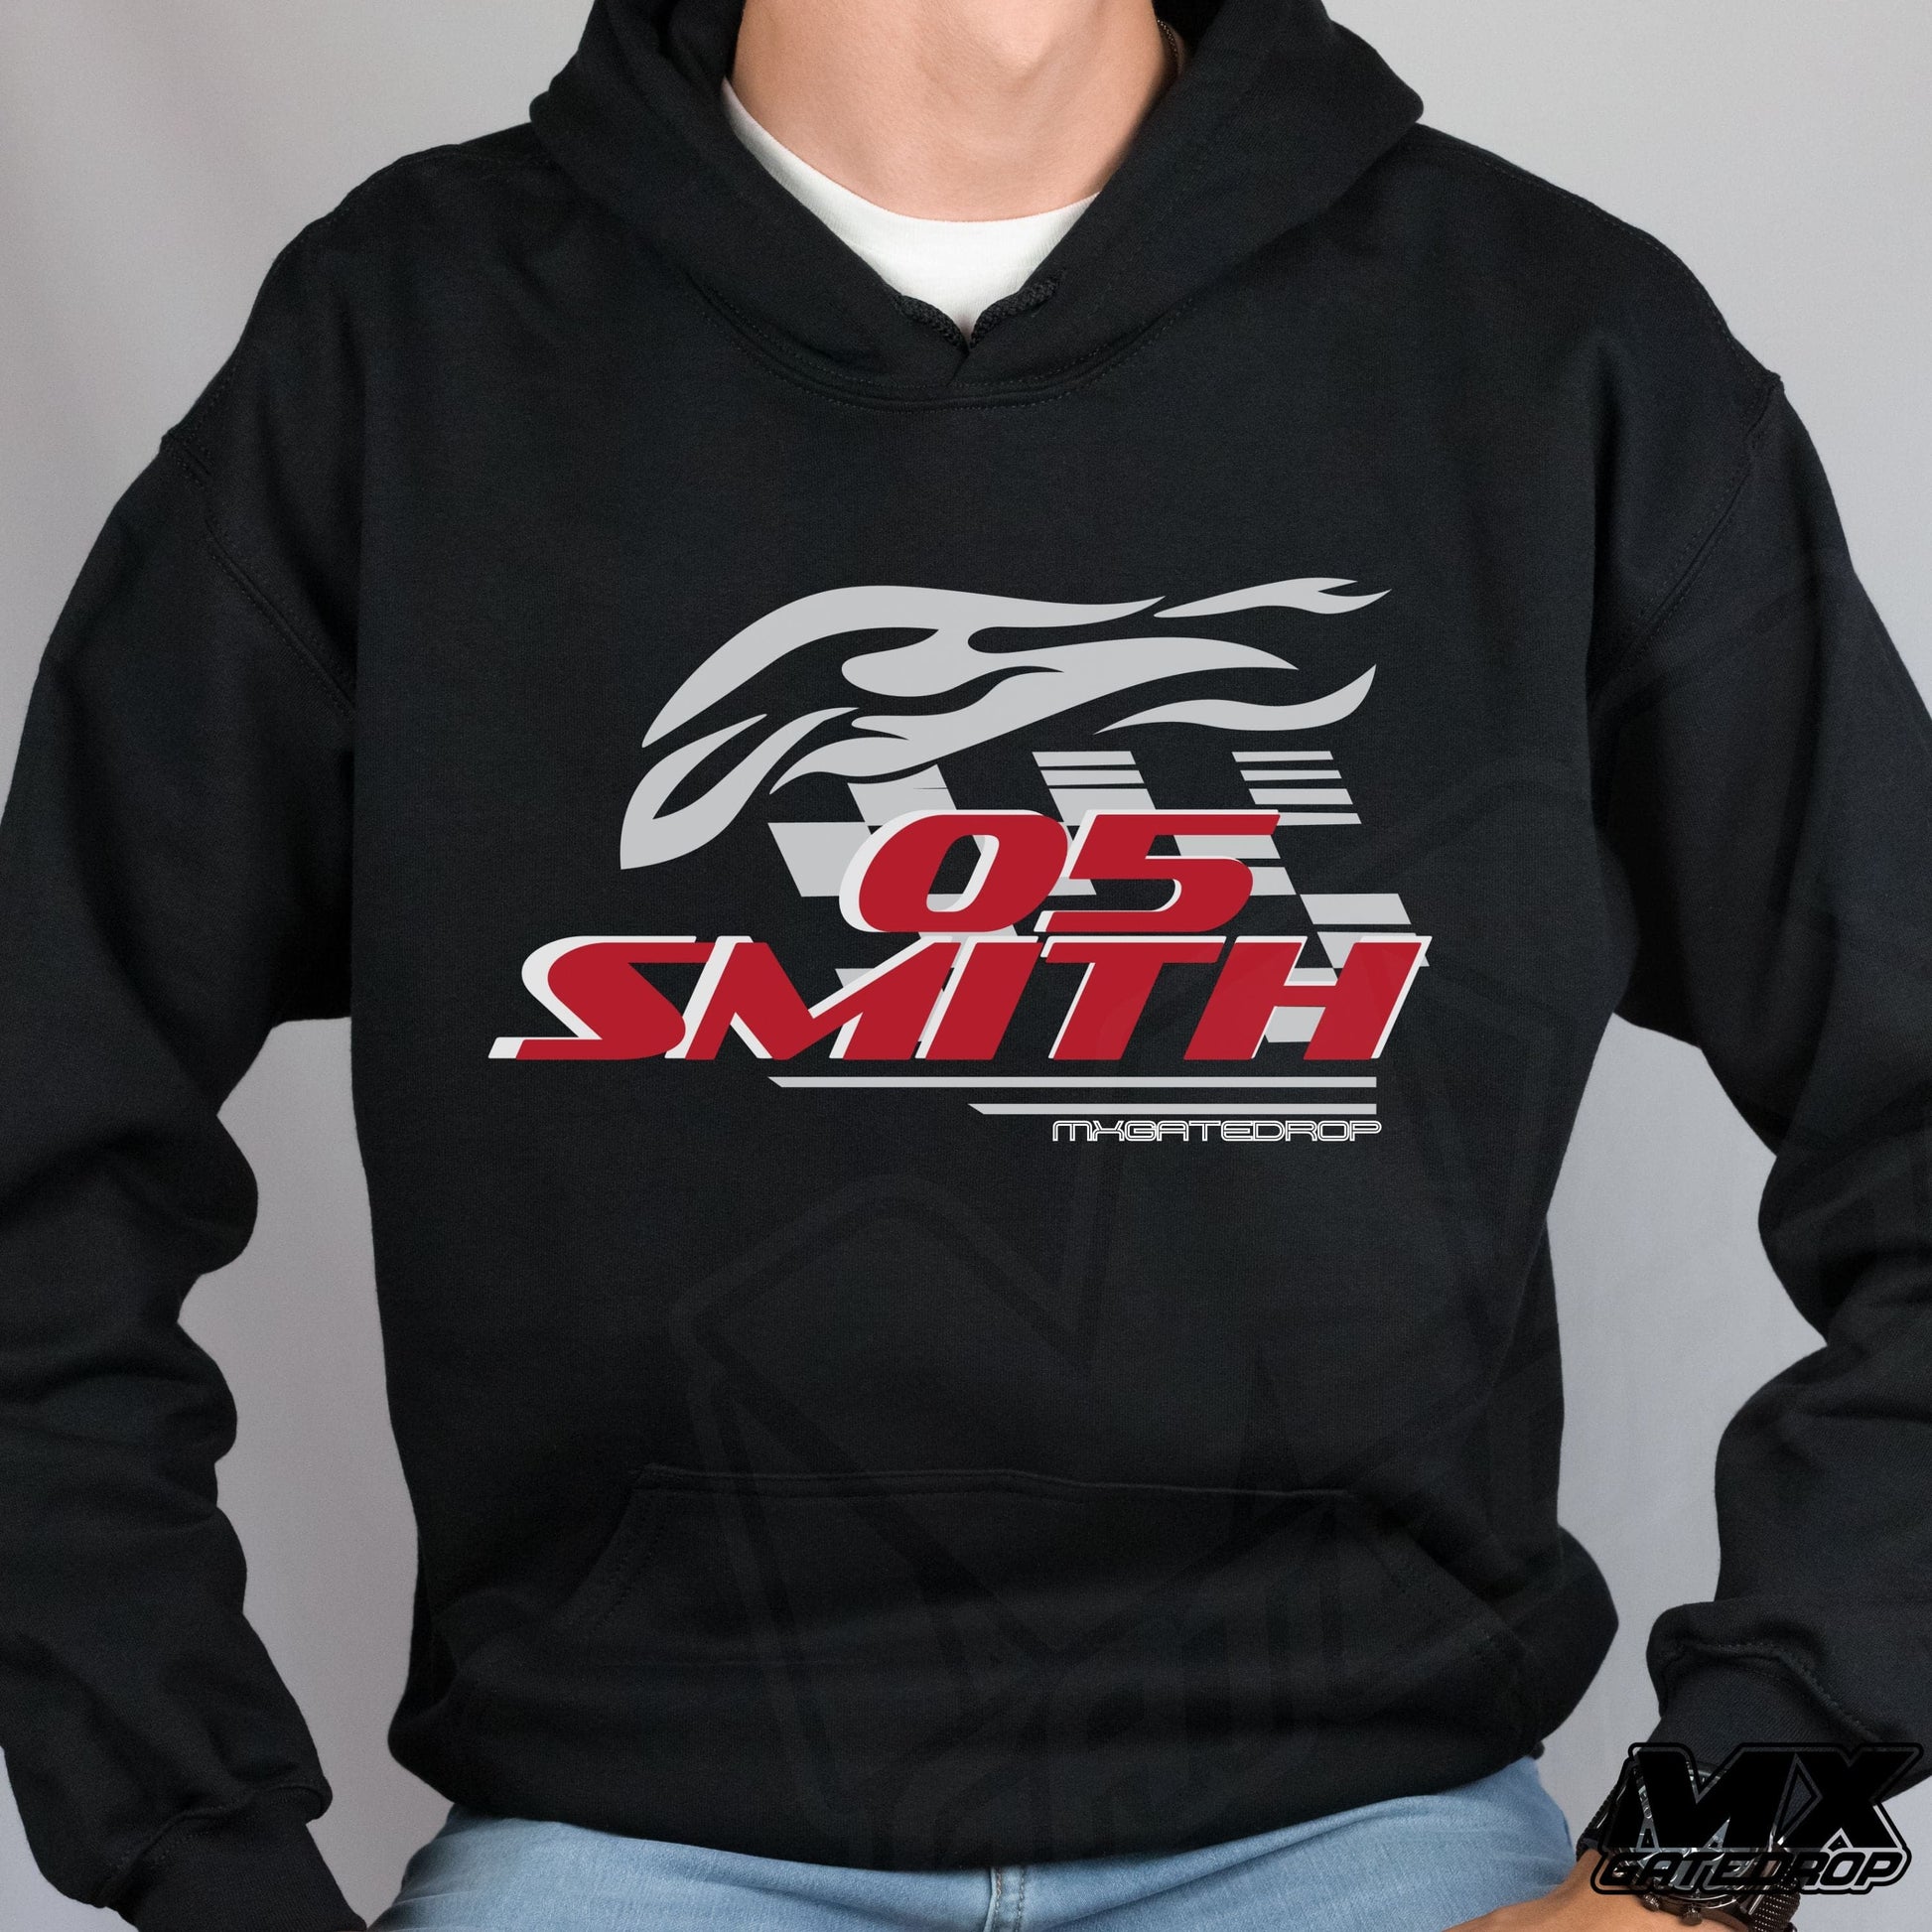 Personalized Motocross Hoodie